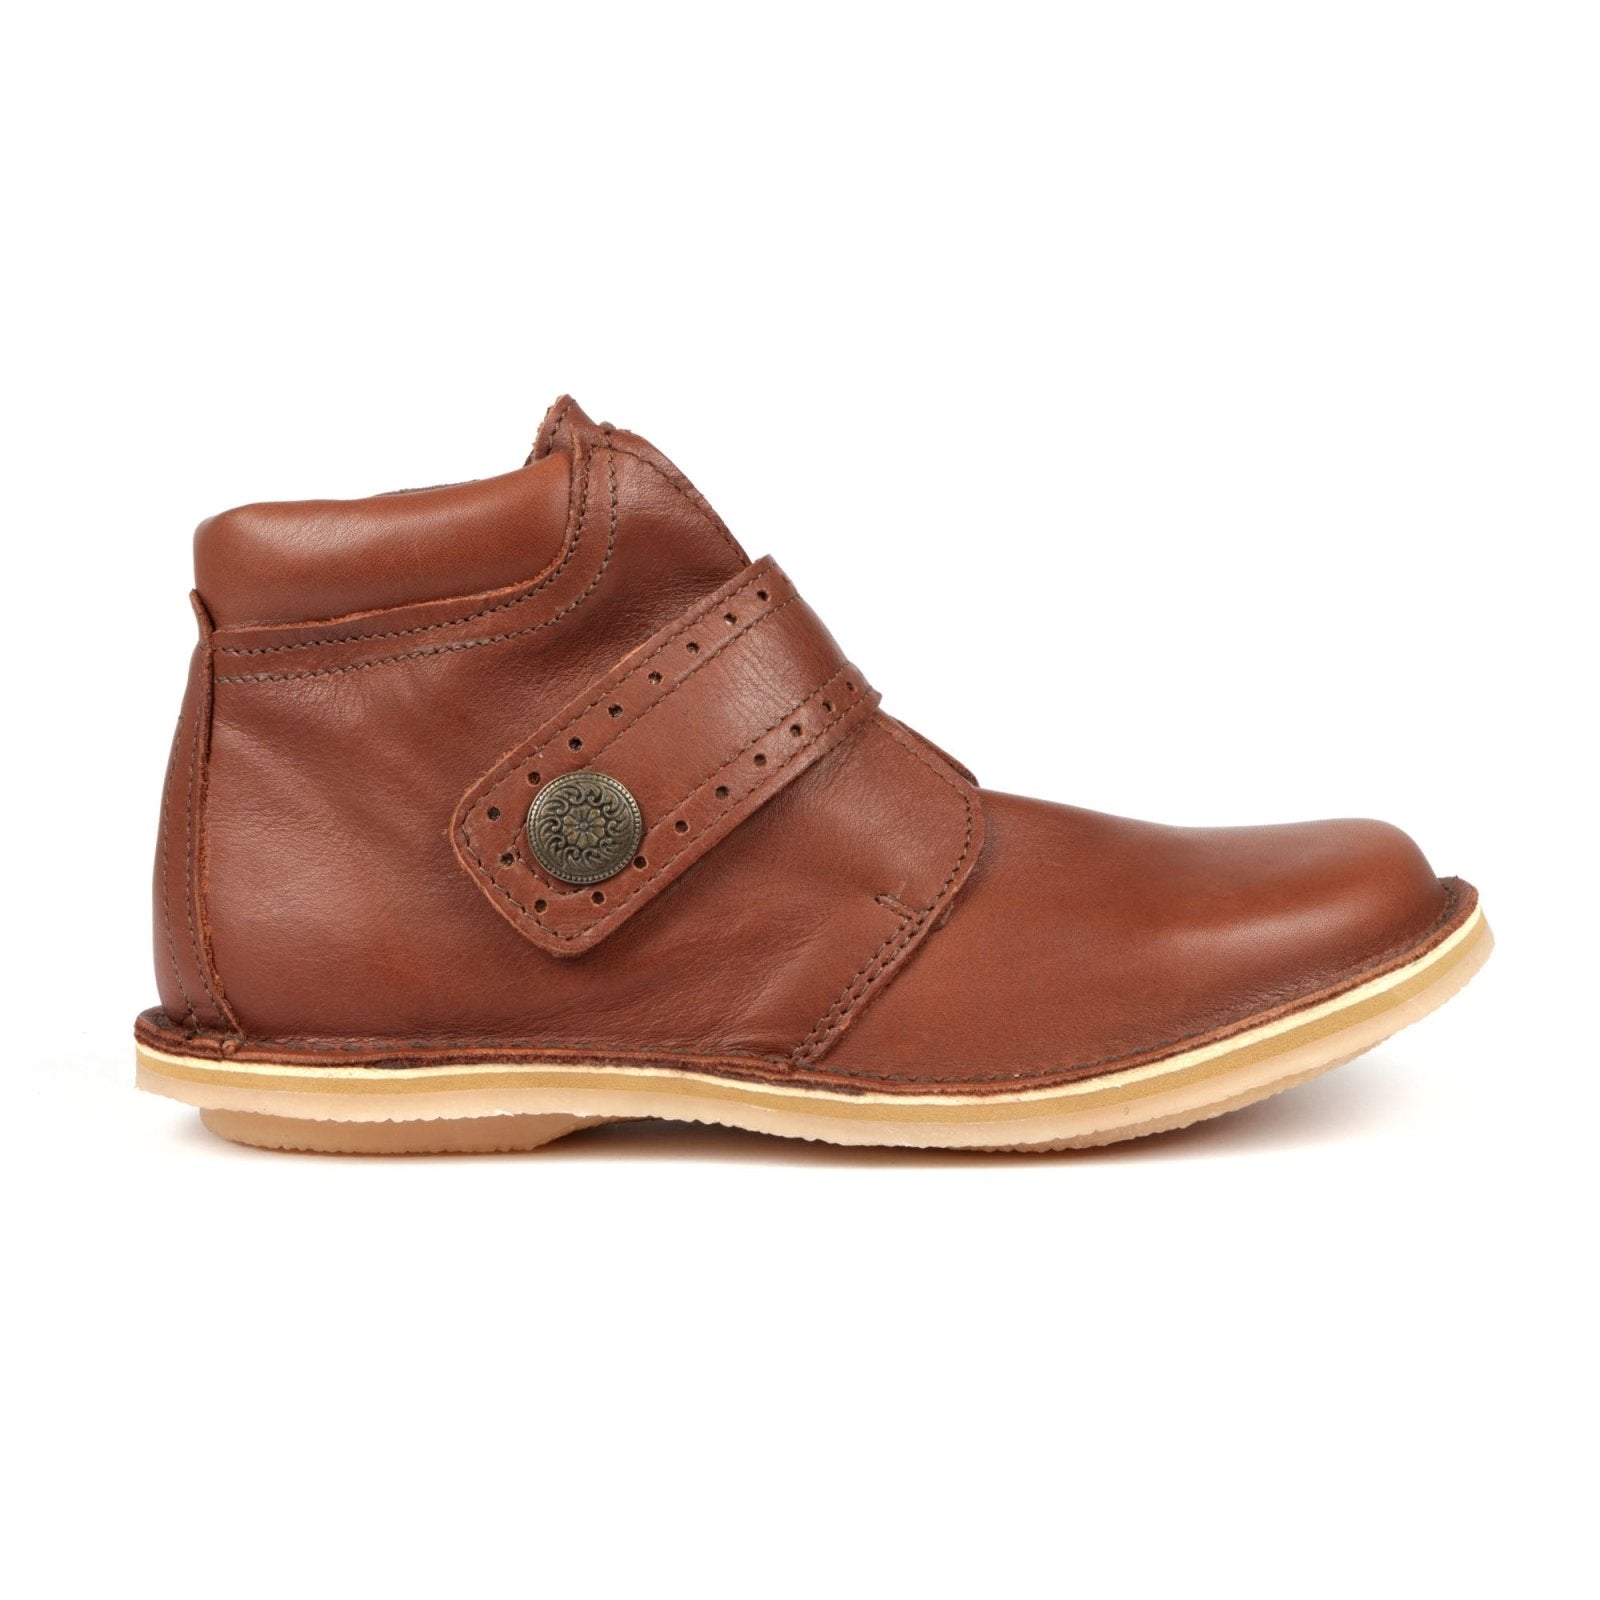 Morag Soft Premium Leather Ladies Boot - Freestyle SA Proudly local leather boots veldskoens vellies leather shoes suede veldskoens